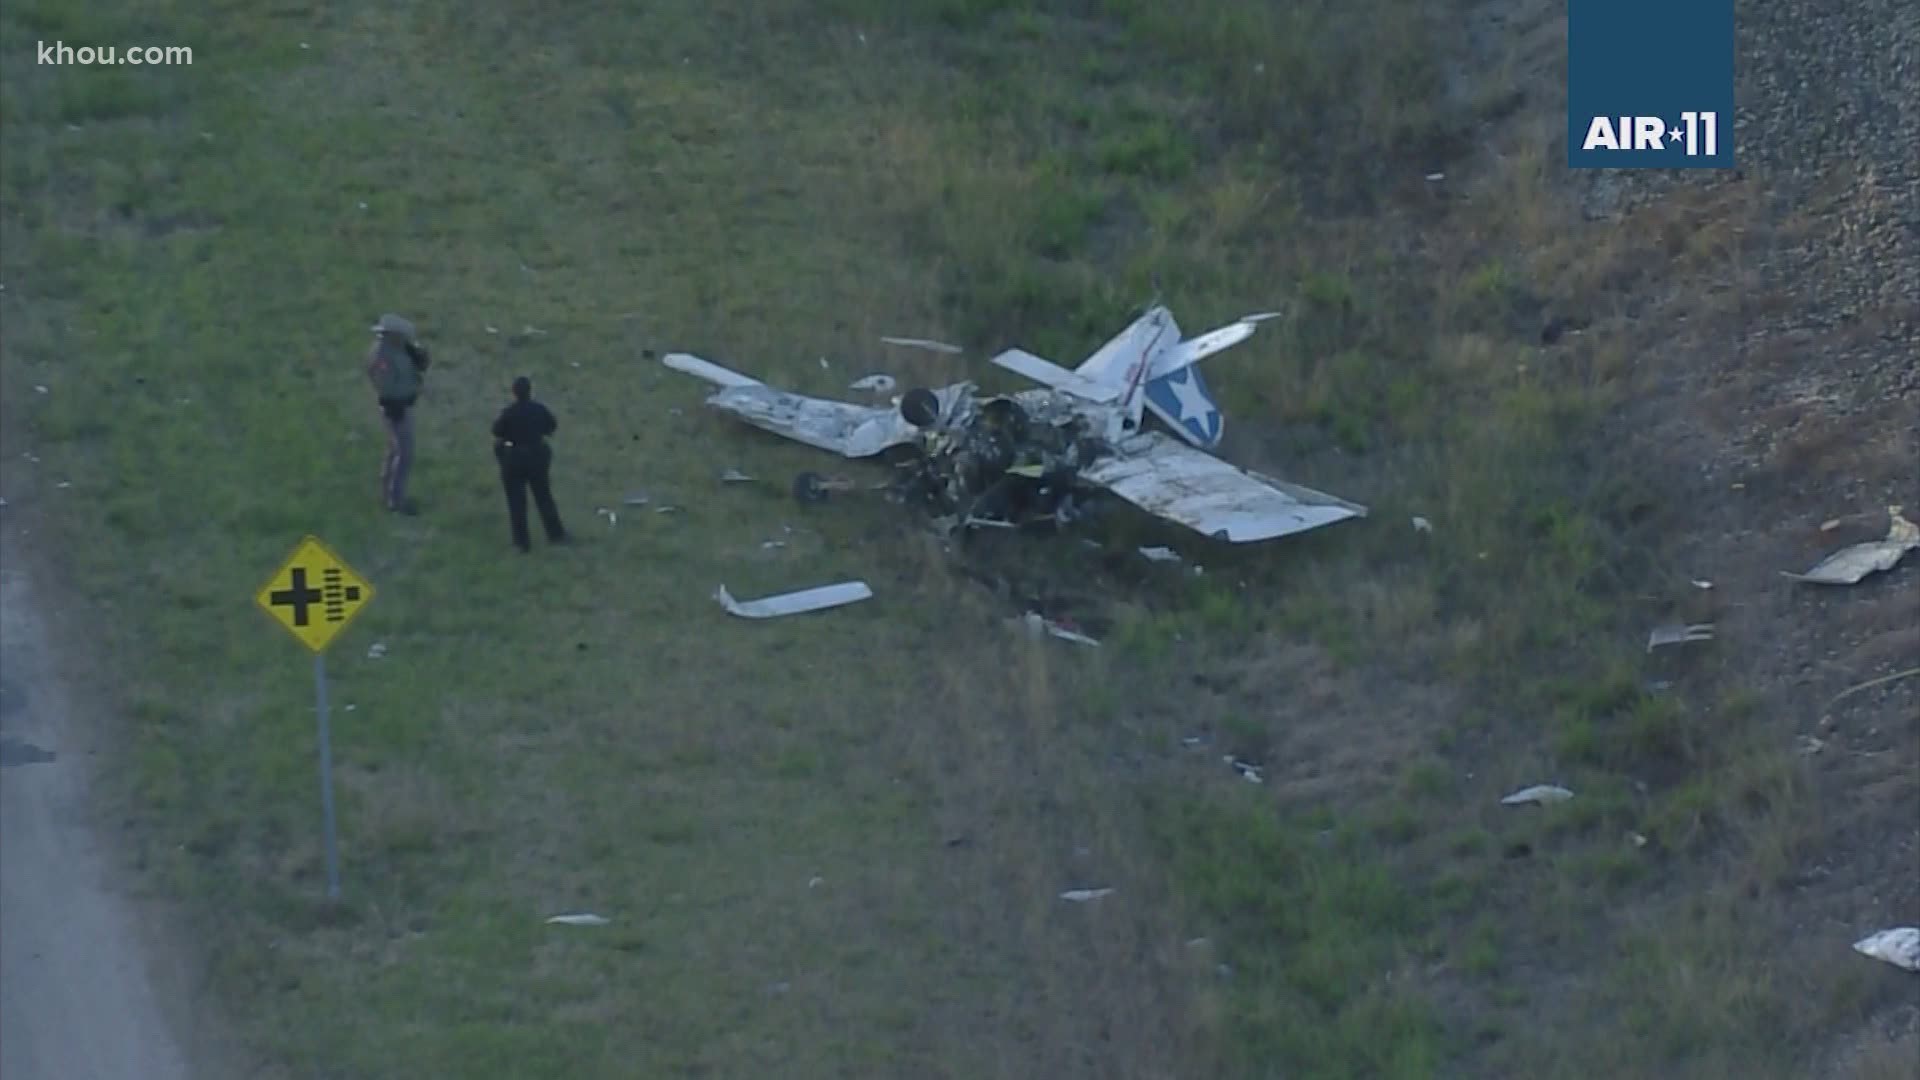 One person was killed Tuesday afternoon when a small plane crashed in a residential area of Galveston County, according to authorities.